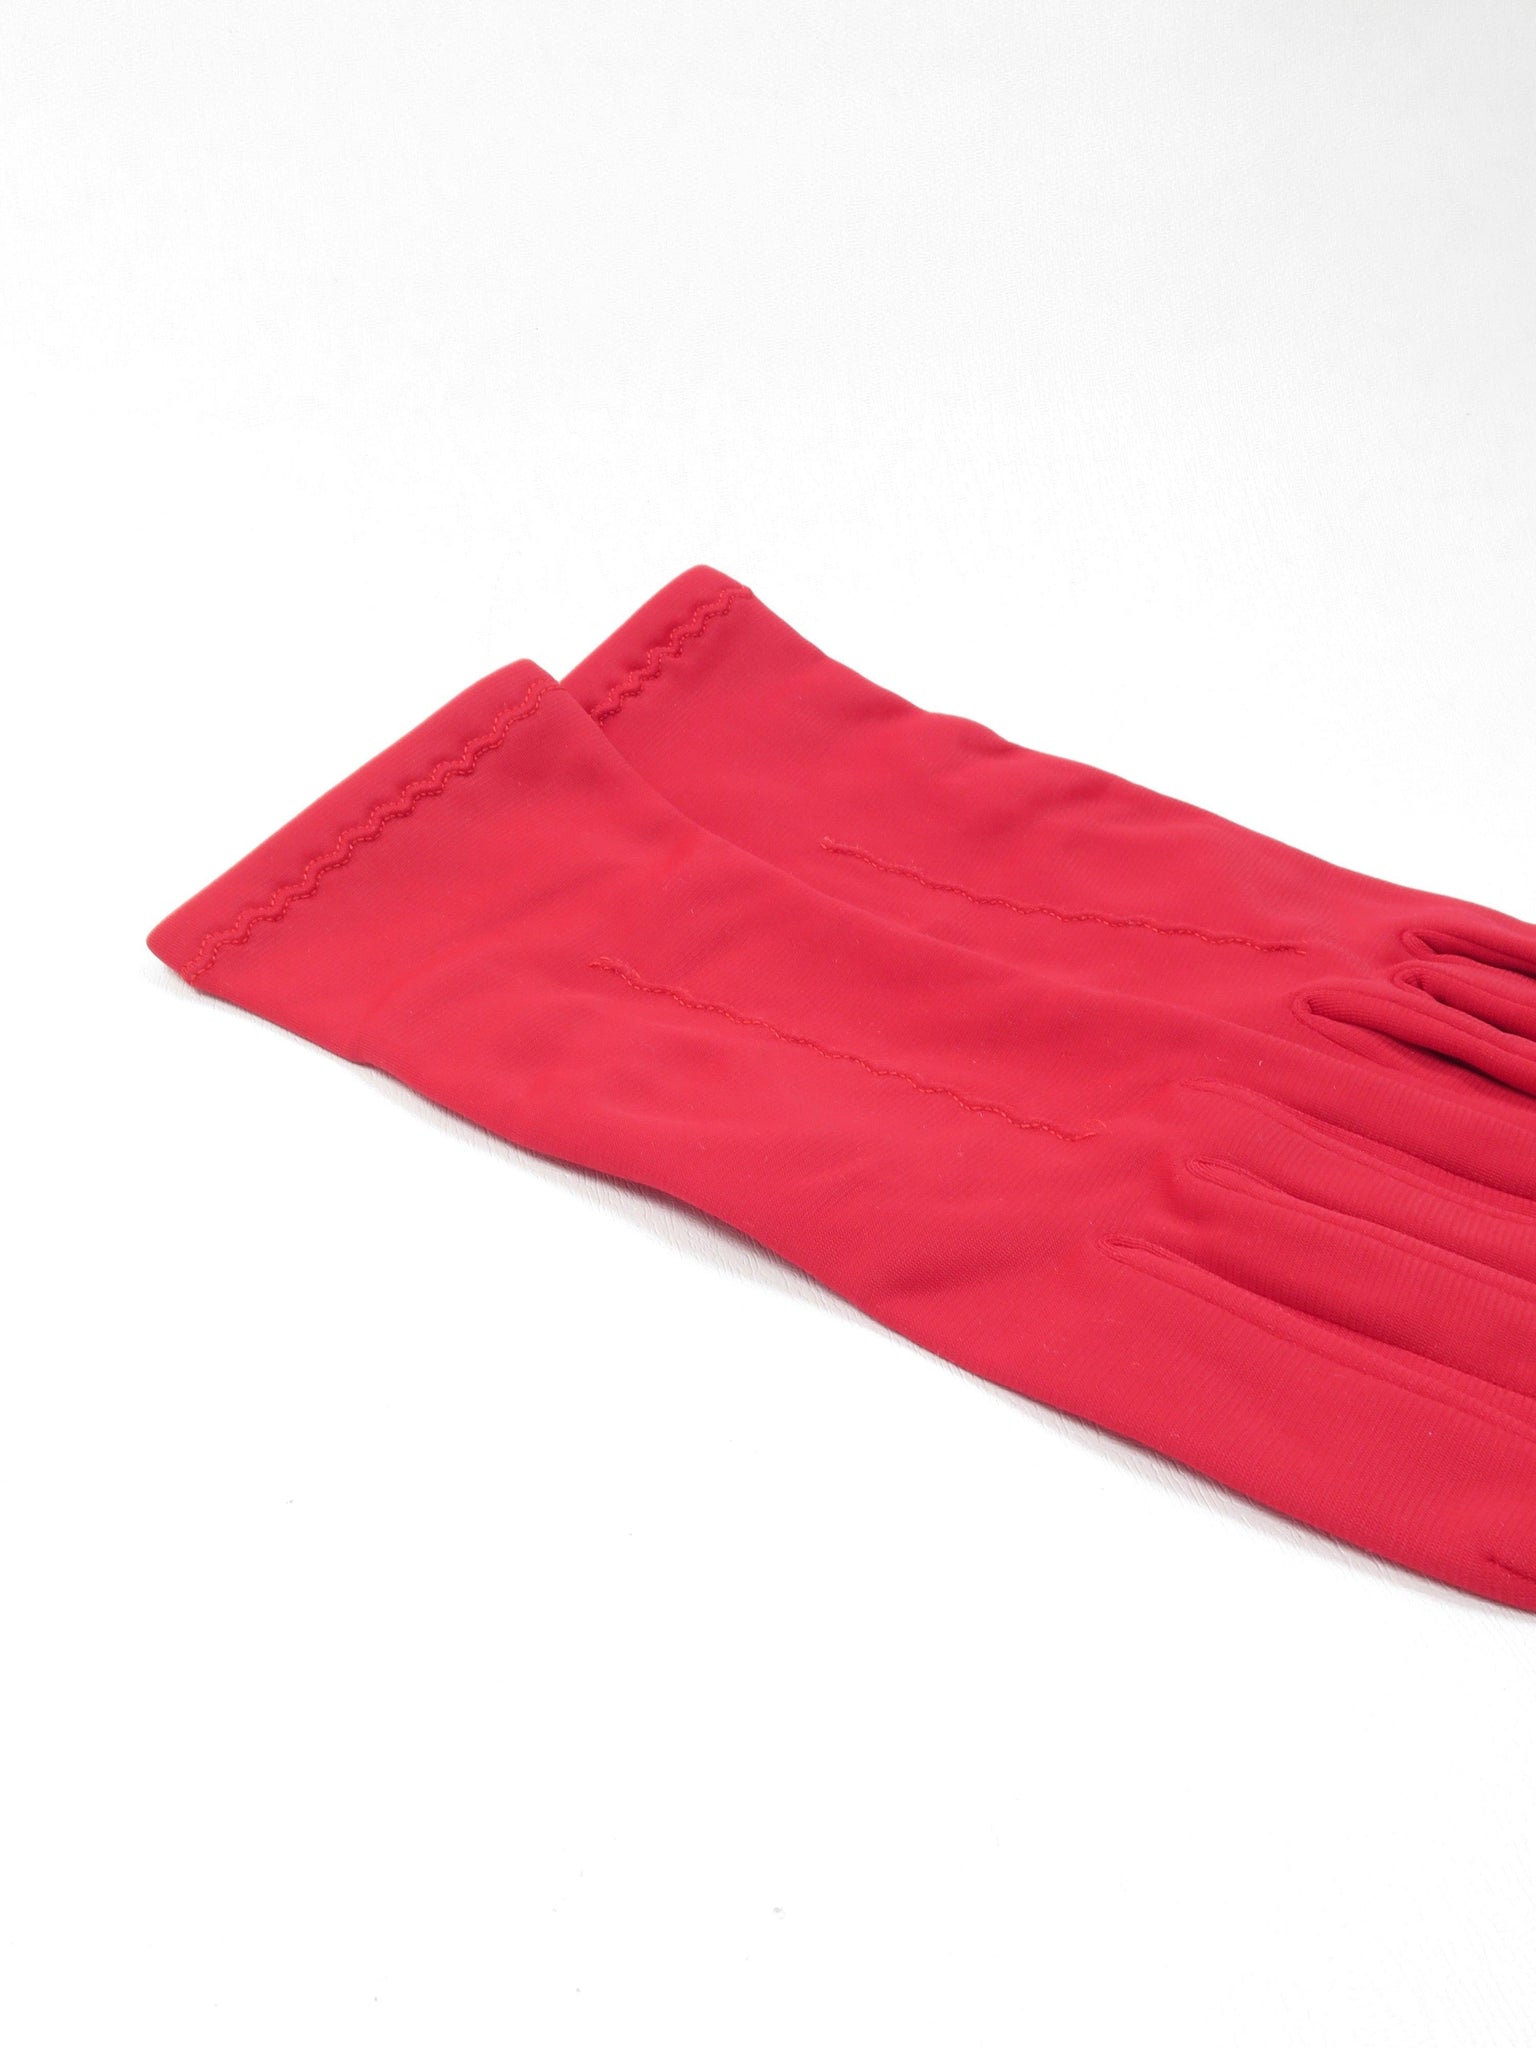 Ladies Vintage Red Gloves Short  Unworn Various Sizes Available - The Harlequin